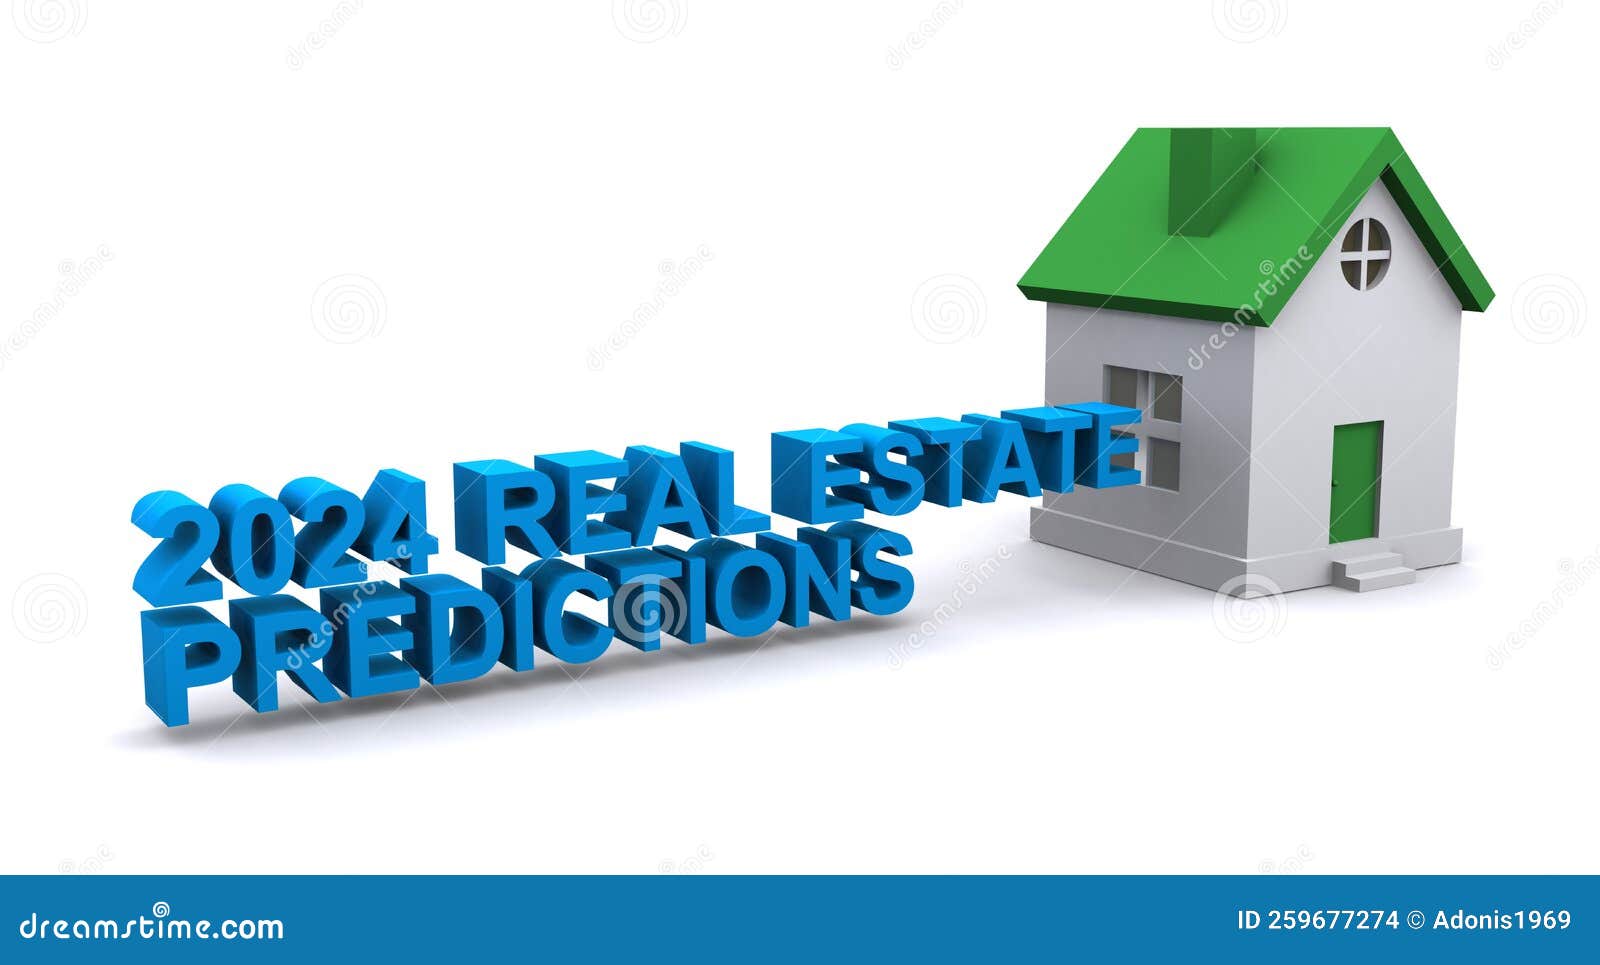 2024 Real Estate Predictions On White RoyaltyFree Stock Image